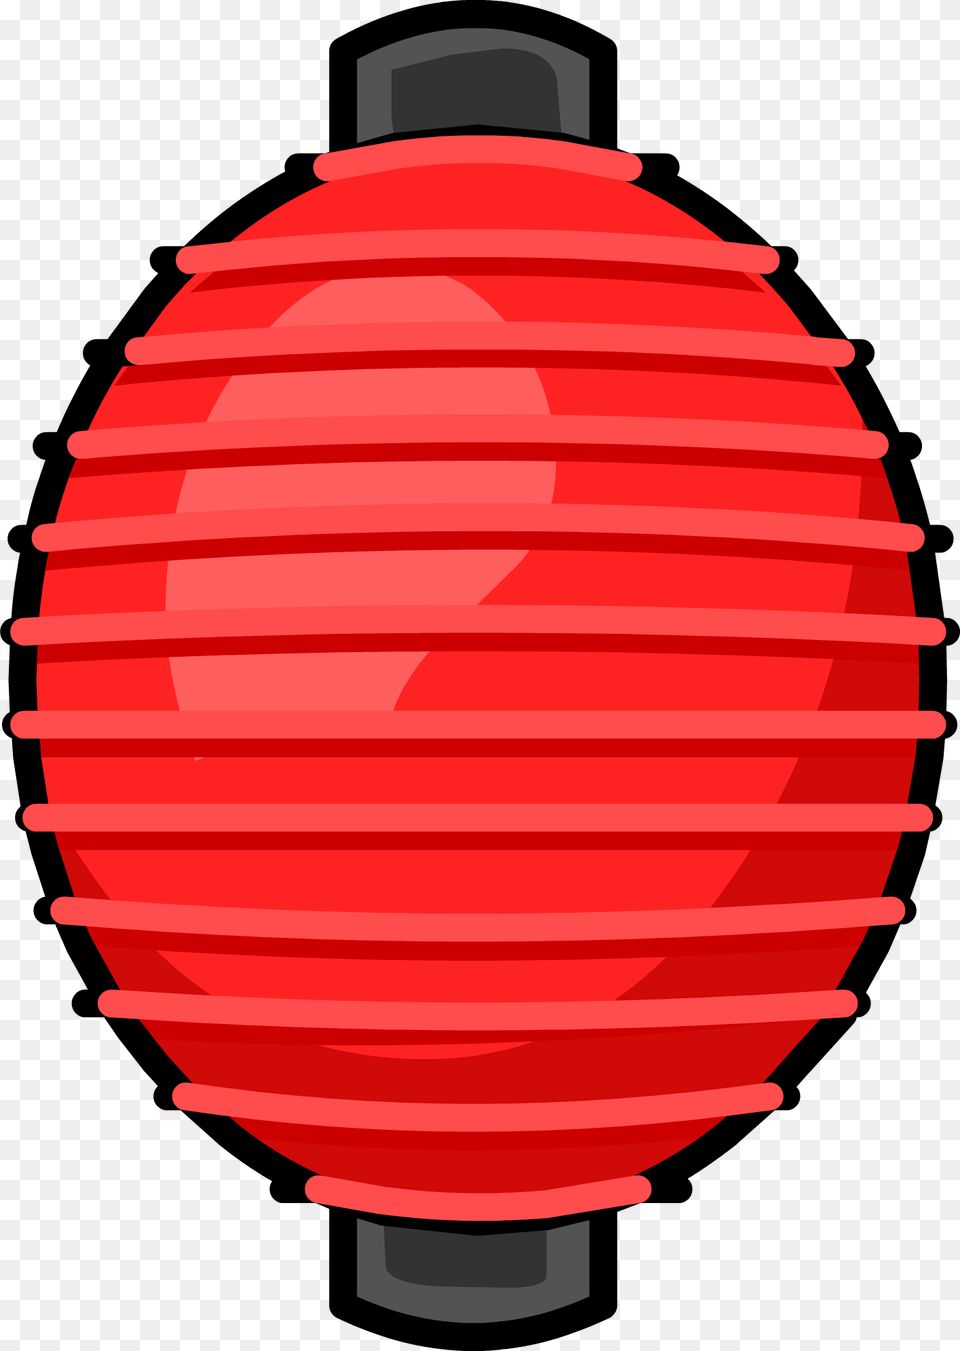 Sphere, Lamp, Light, Fire Hydrant Png Image